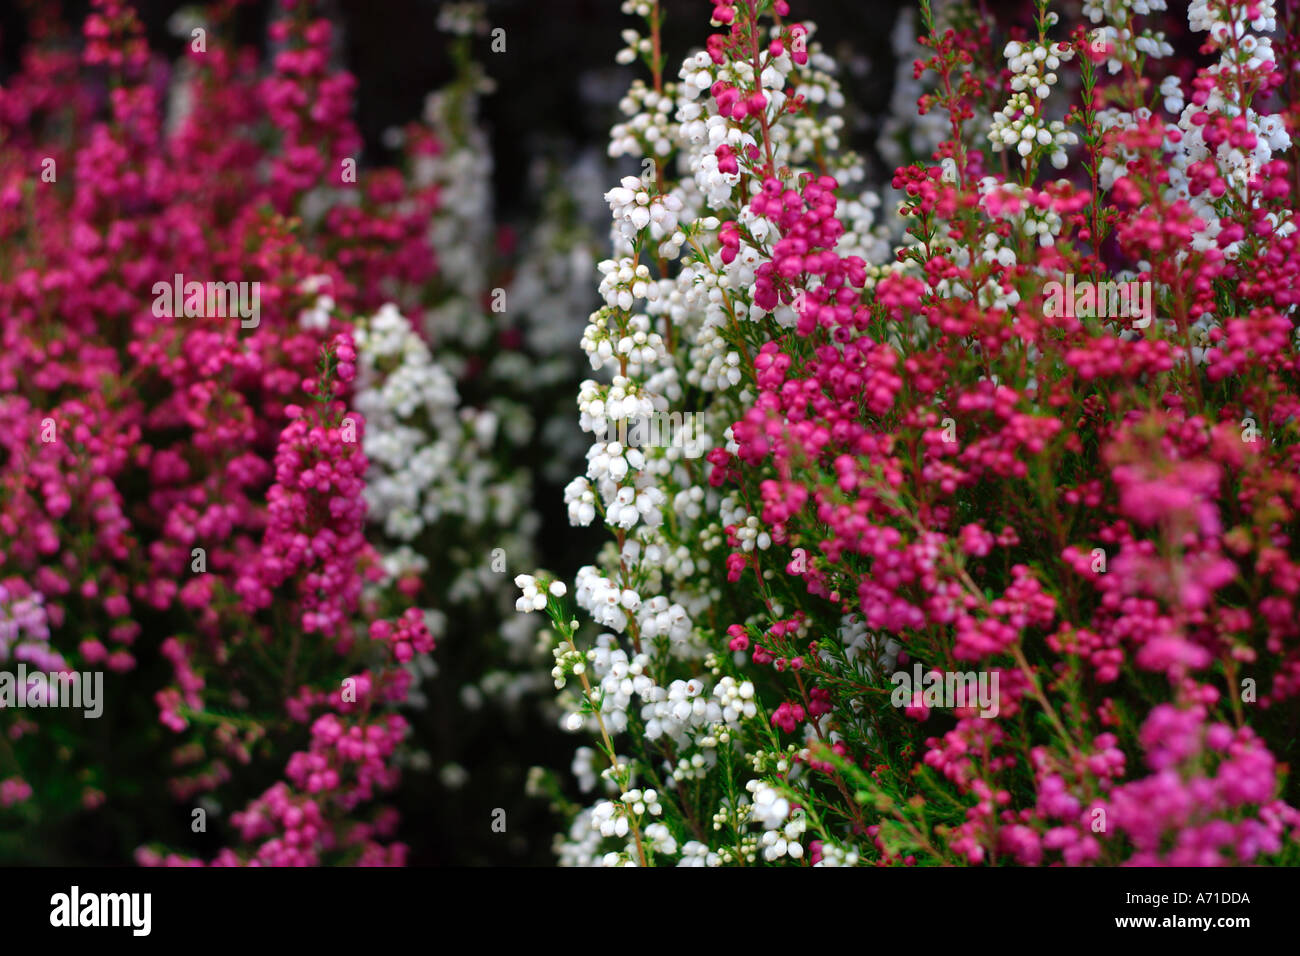 Heather in white pink and red Calluna vulgaris L Hull Stock Photo